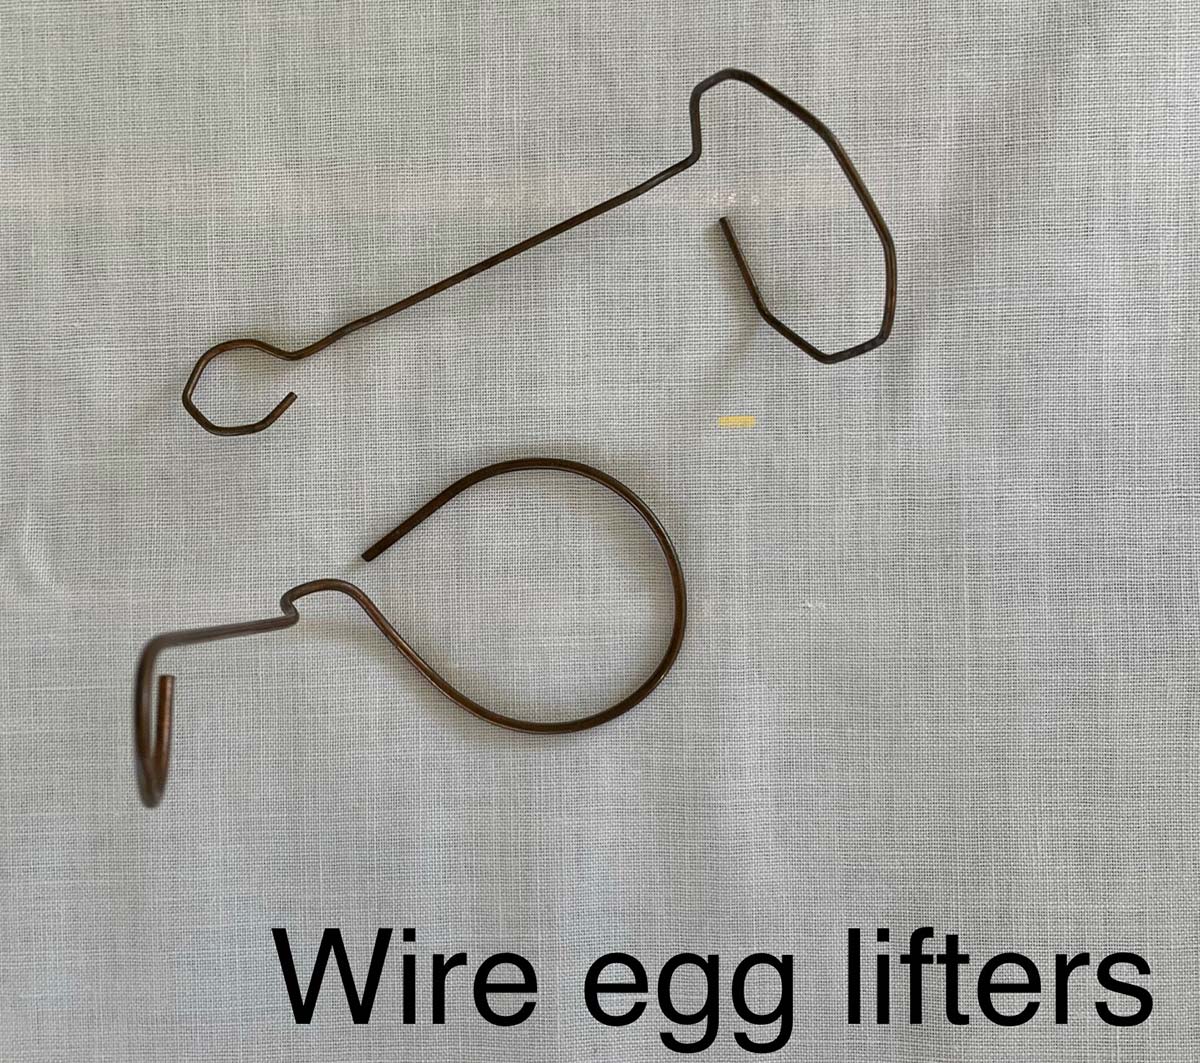 Homemade wire egg lifters for dying Easter eggs